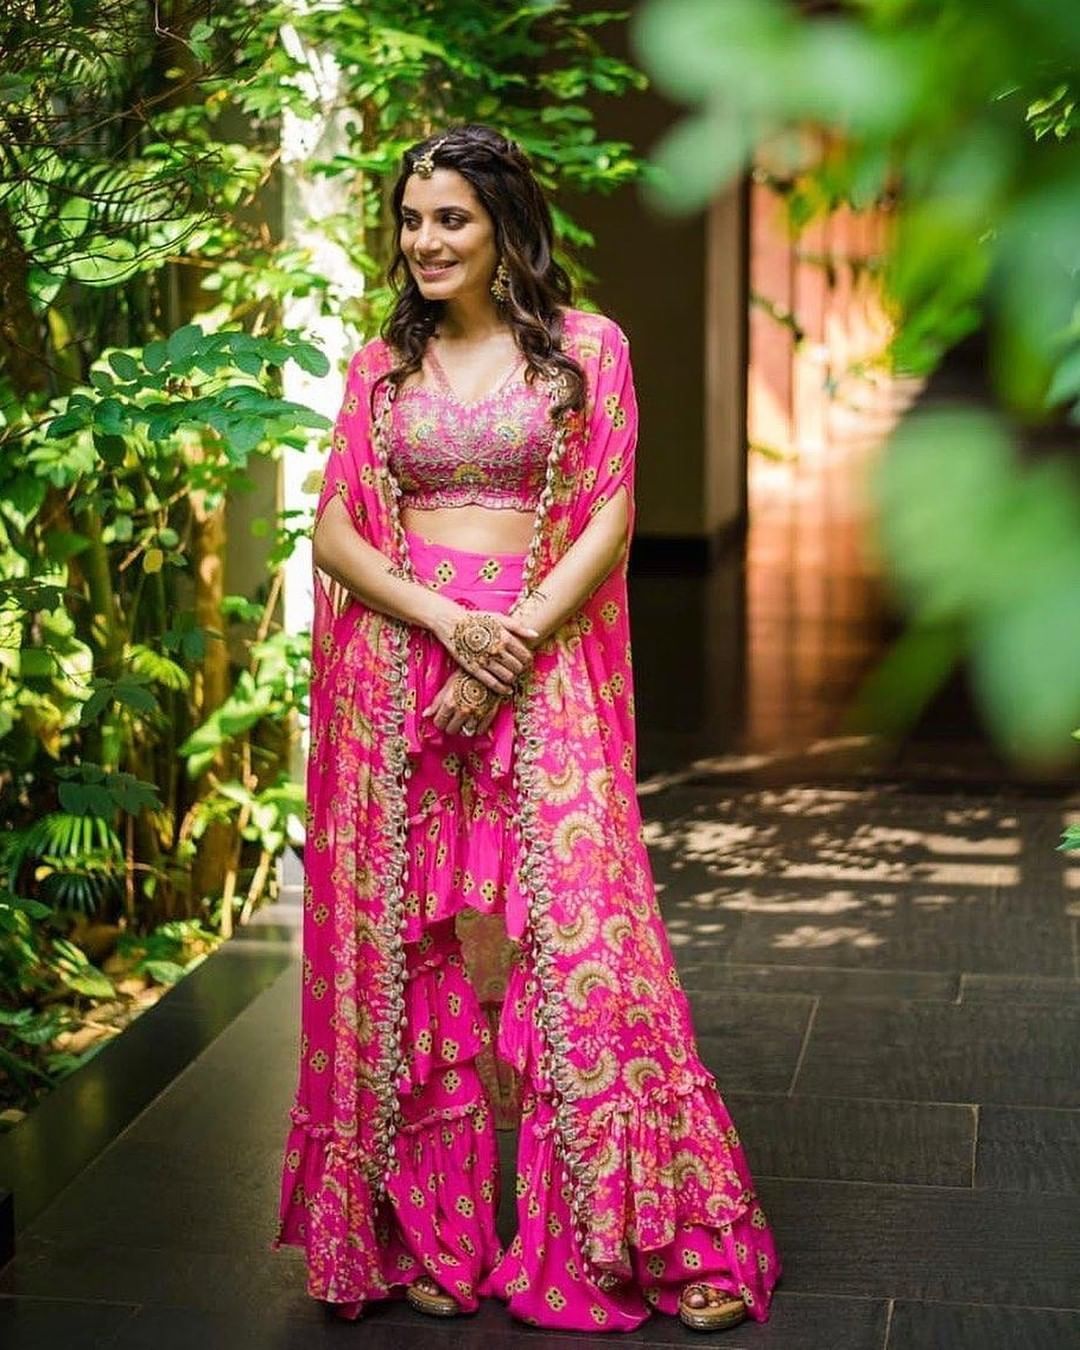 bride wearing a pink cape outfit on mehendi